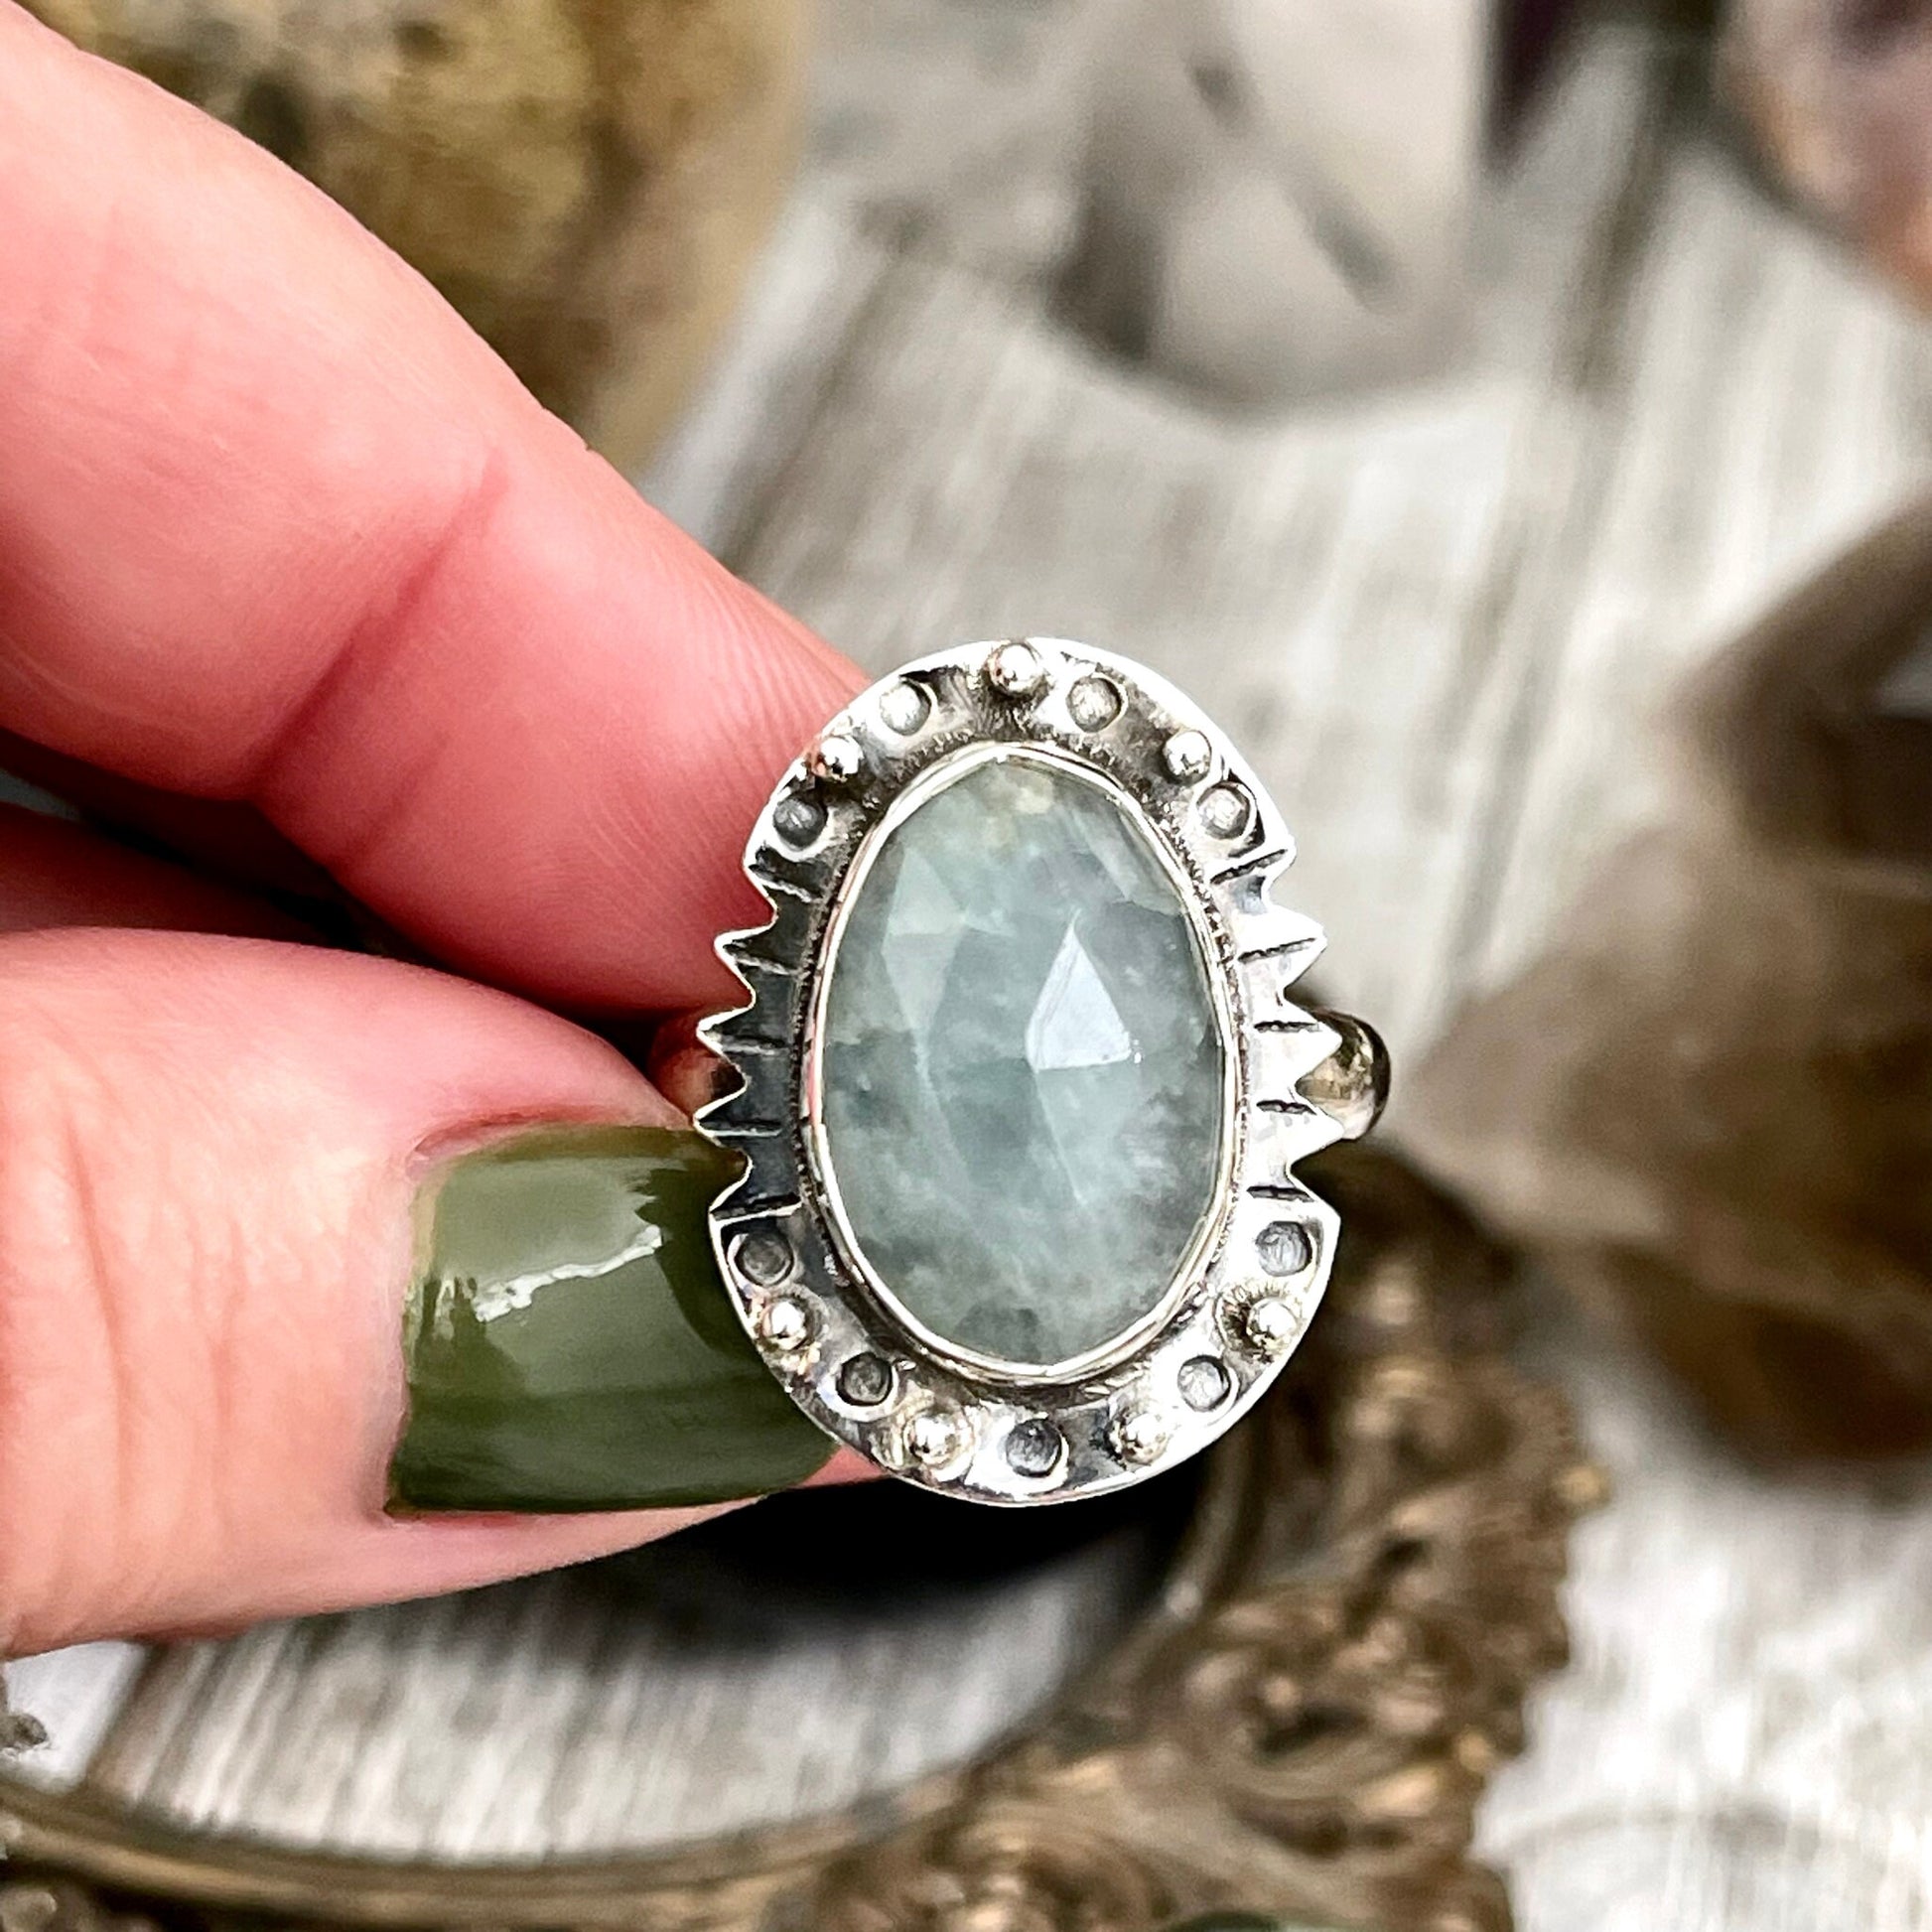 Aquamarine Oval Crystal Statement Ring in Sterling Silver Available in Size 8 9 10 - Foxlark Crystal Jewelry